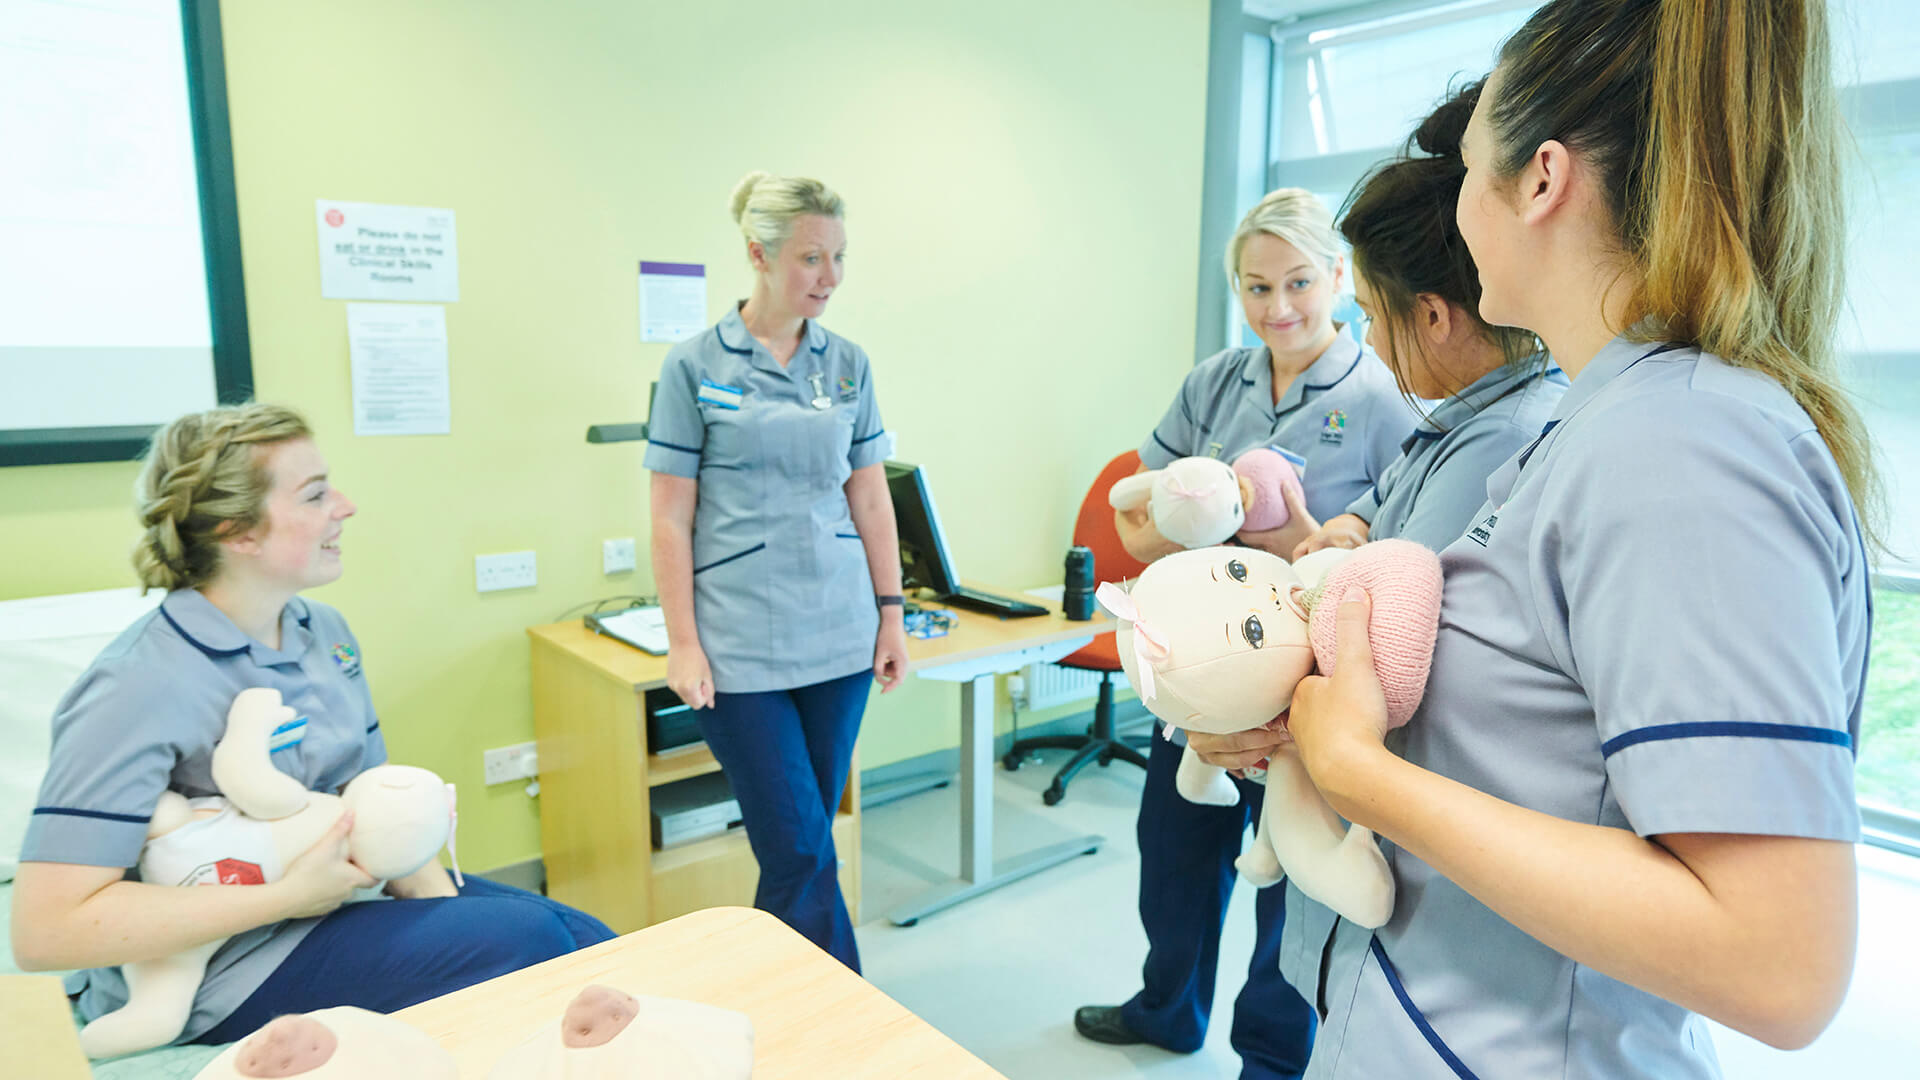 Midwifery students discover how facilitate positioning and attachment during breastfeeding.